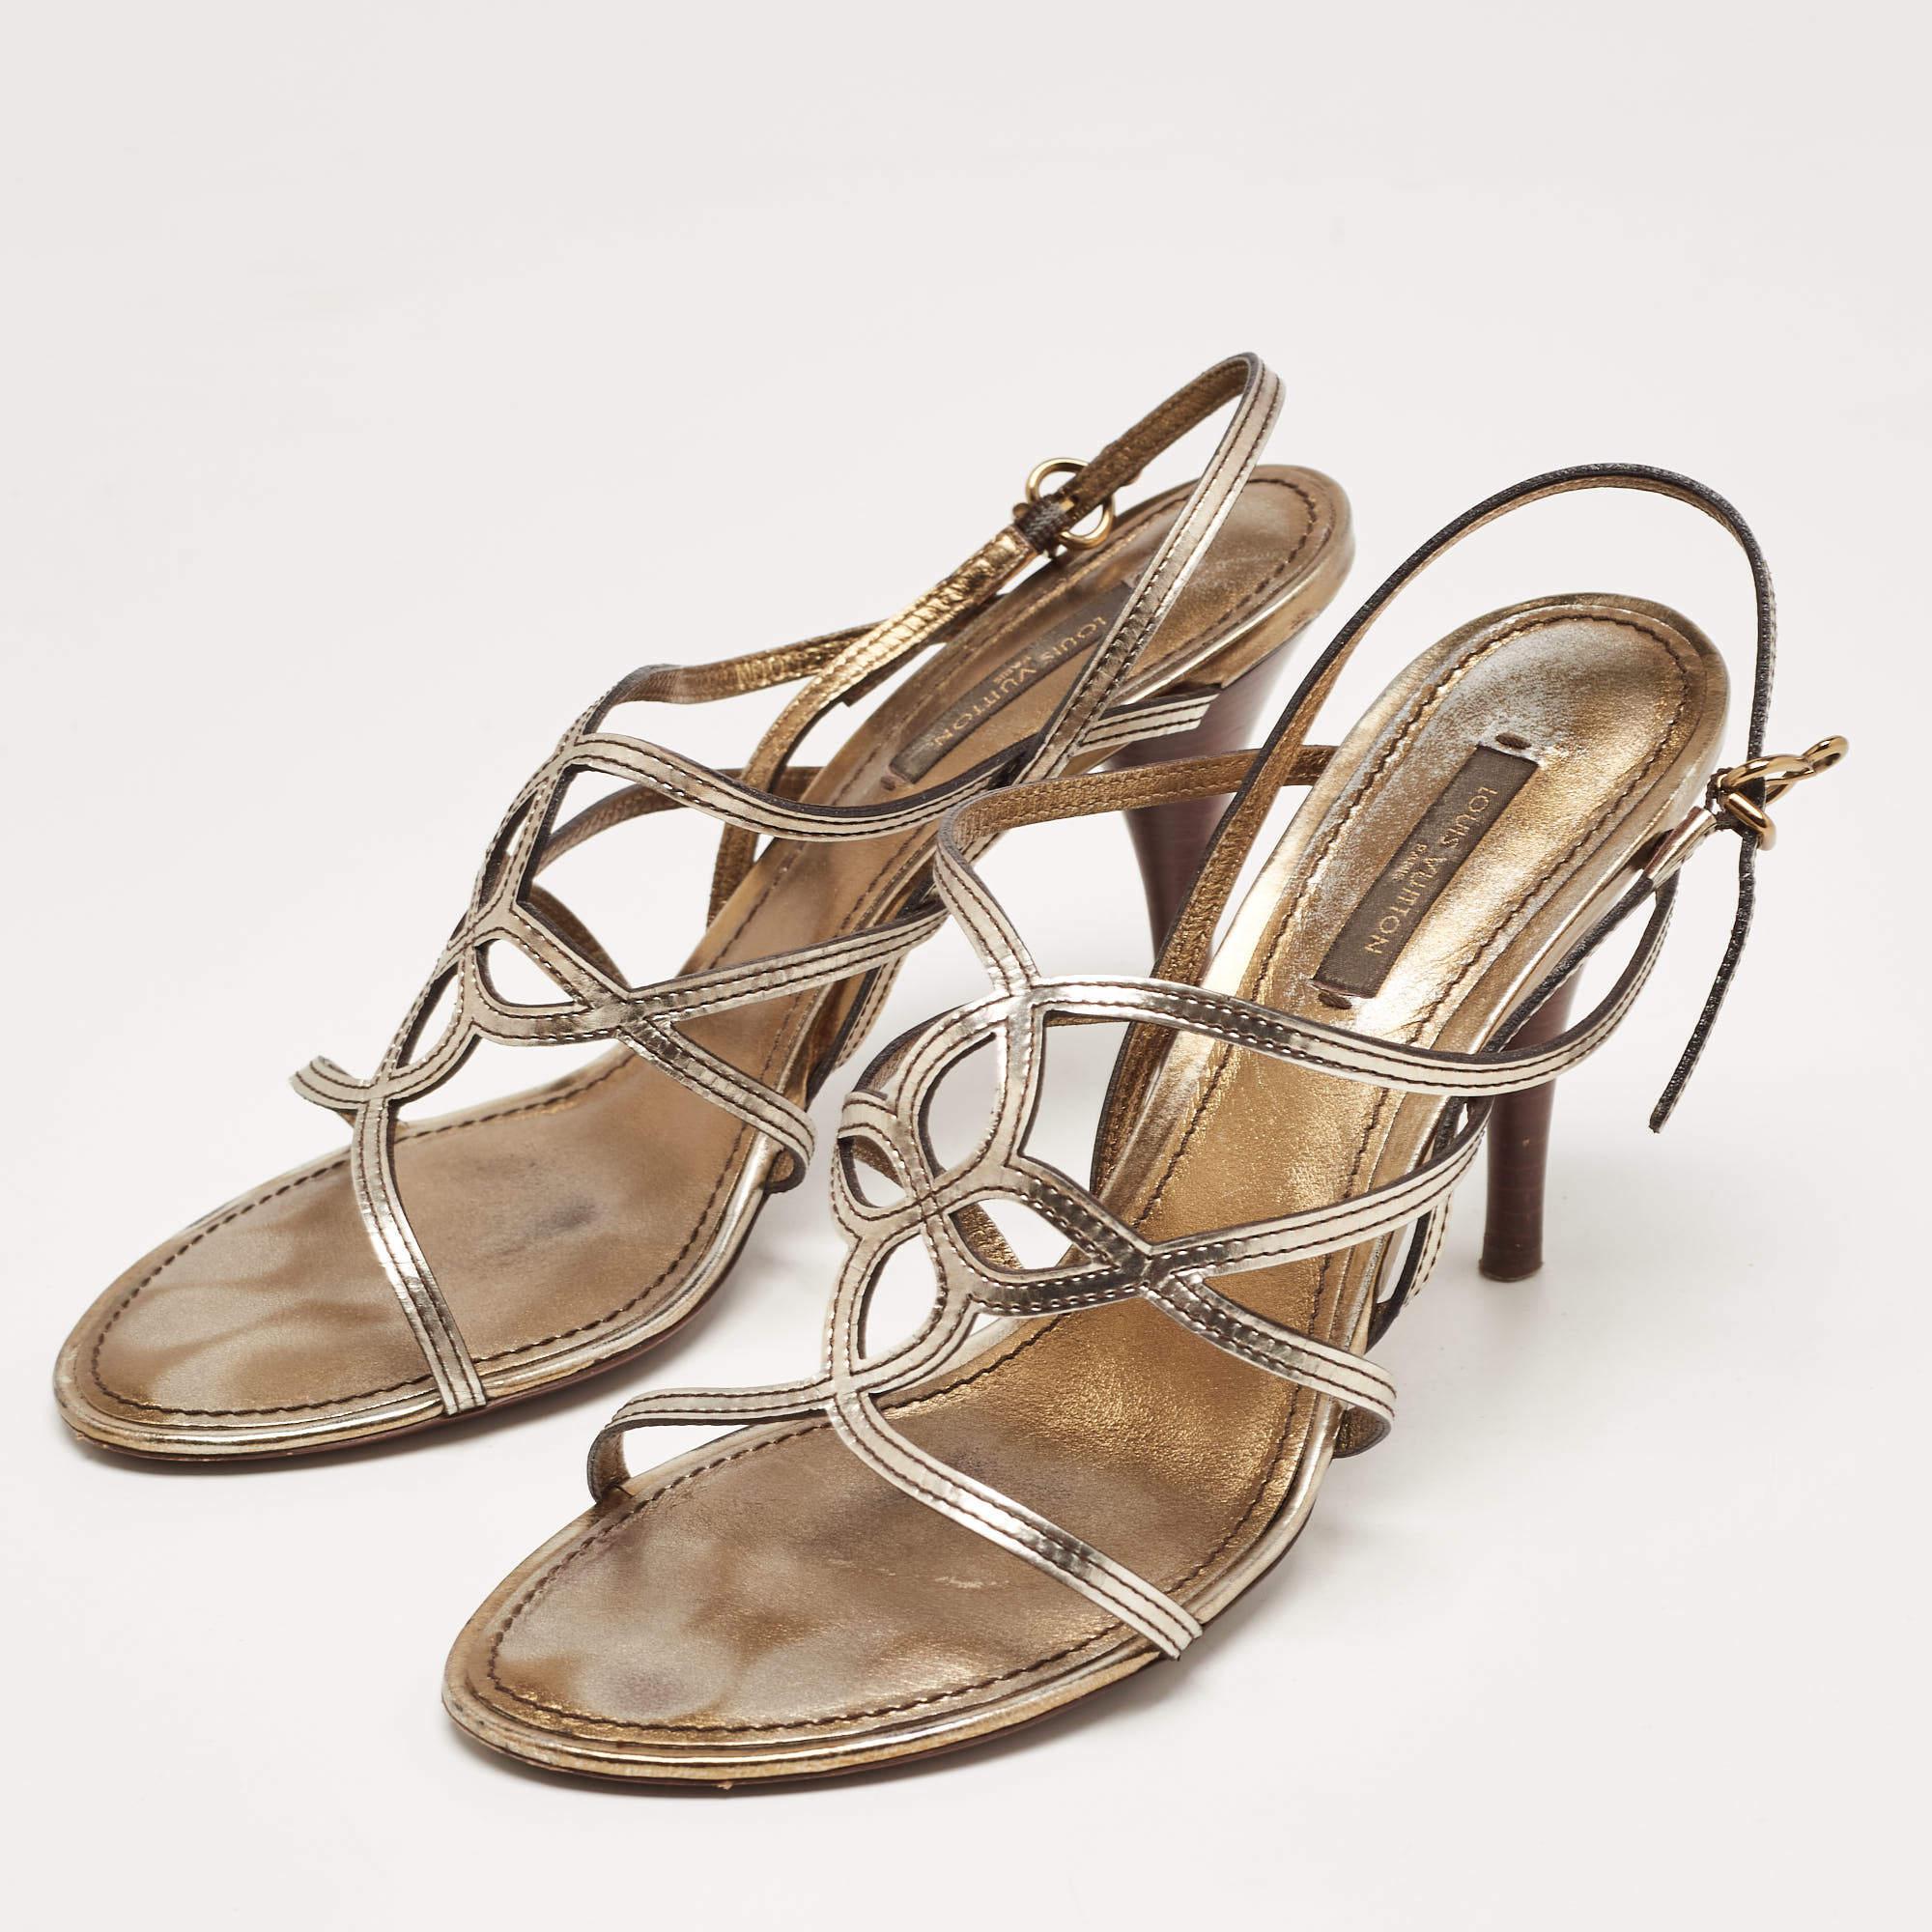 Louis Vuitton Metallic Leather Strappy Sandals Size 37.5 For Sale 4